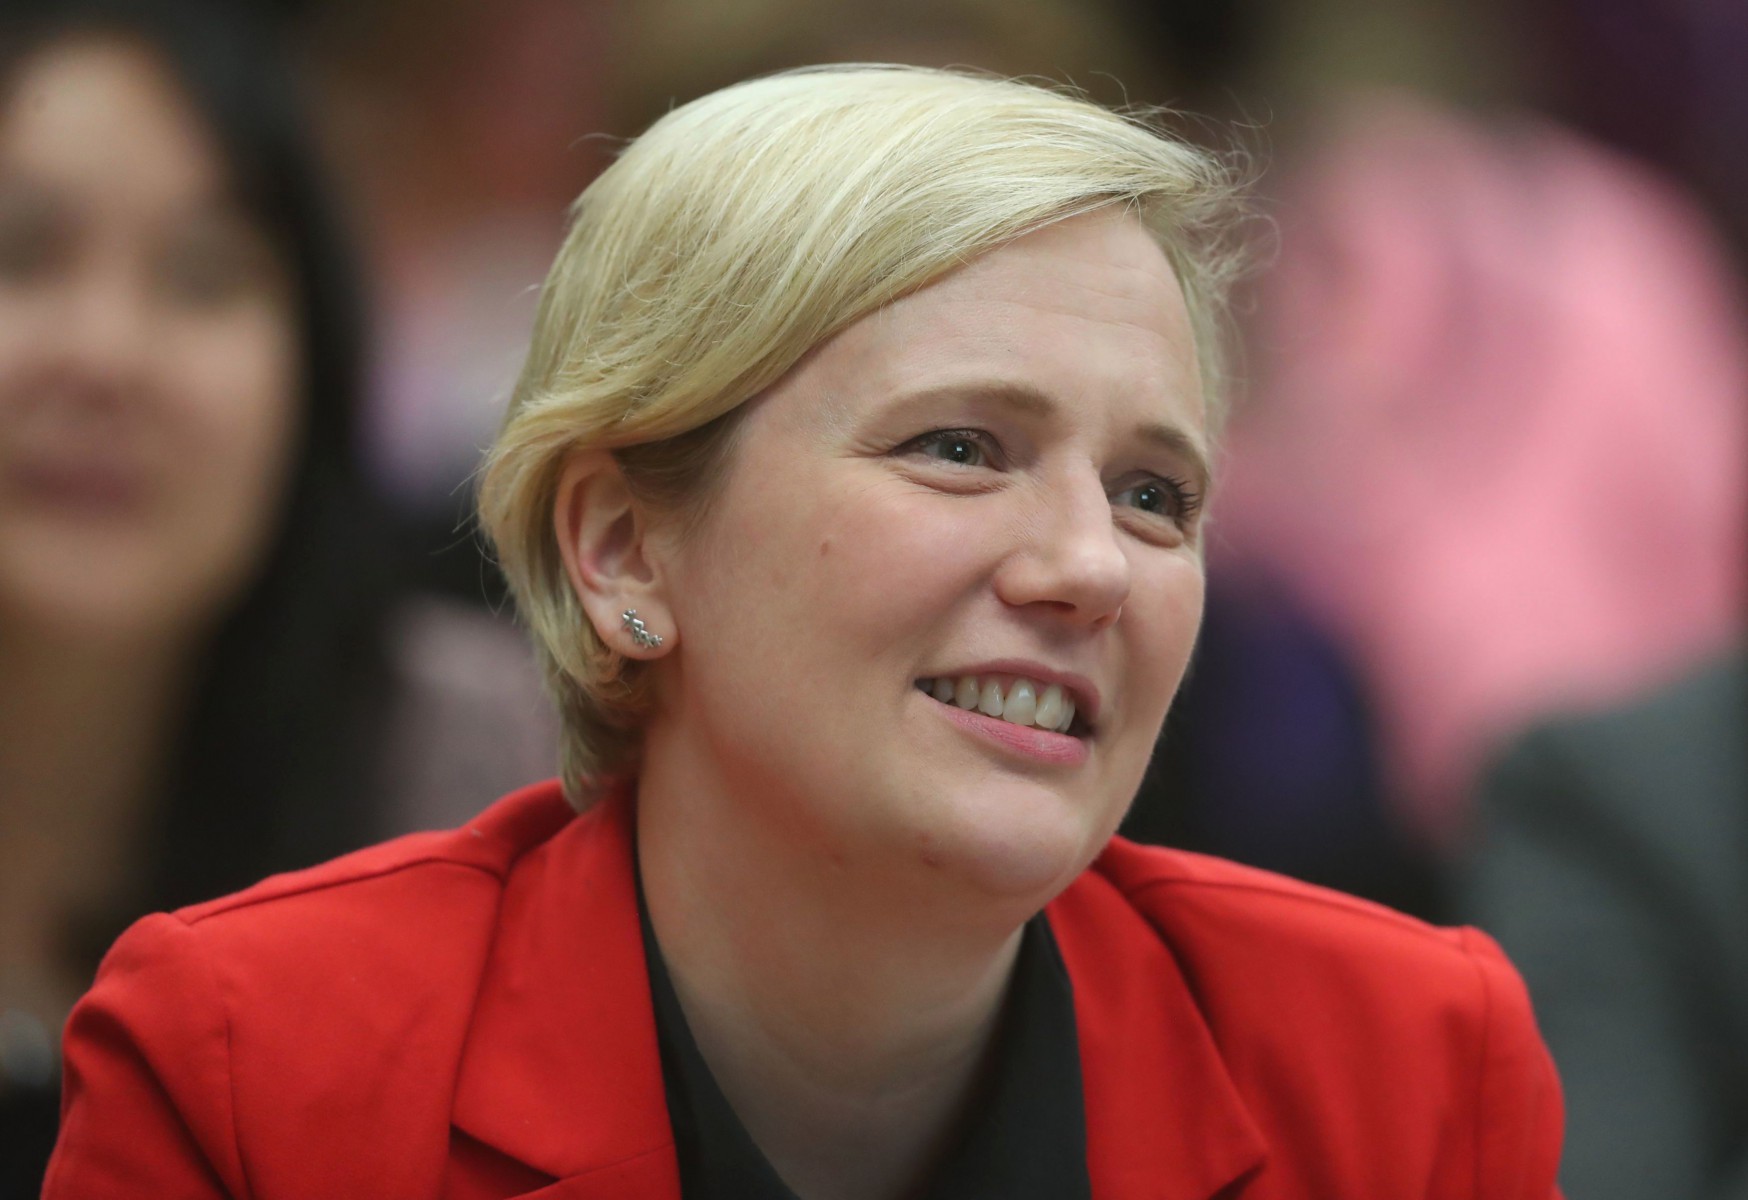 Labour politician Stella Creasy slammed her partys leadership online for its failure to discipline the wannabe MP